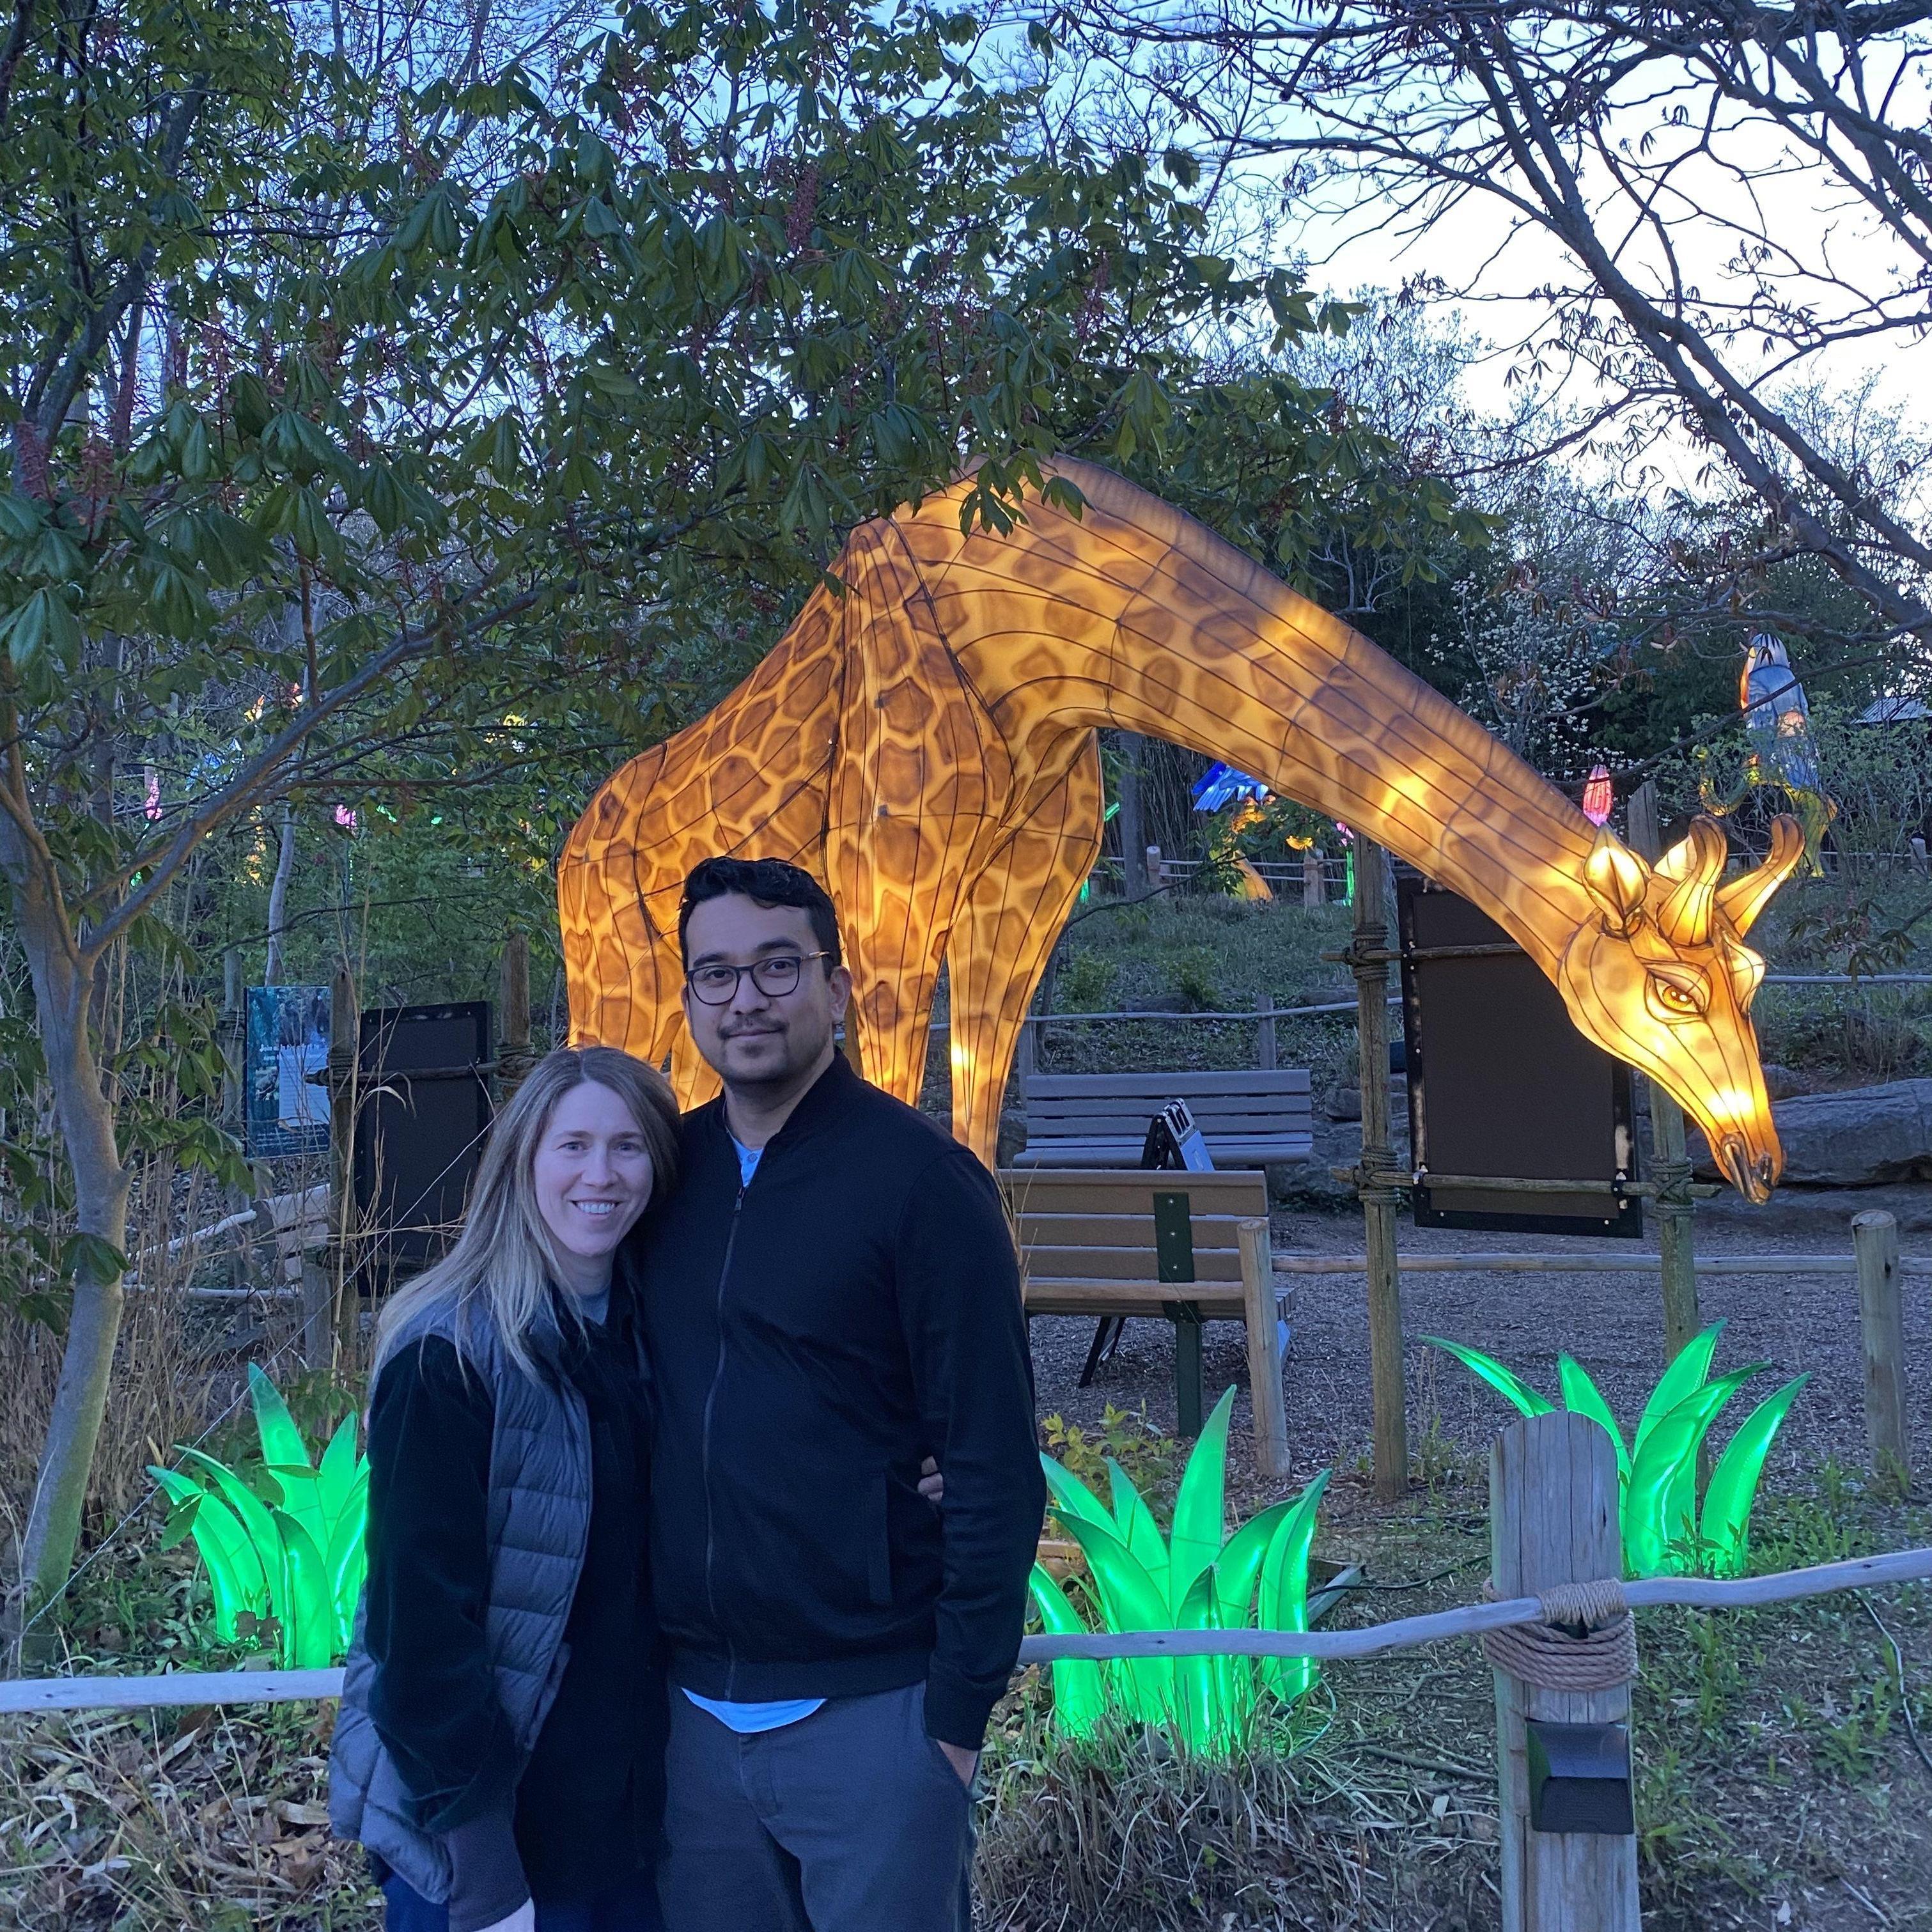 We cannot speak highly enough about Zoo Lights at the Louisville Zoo. If you get the opportunity, please visit Zoo Lights.